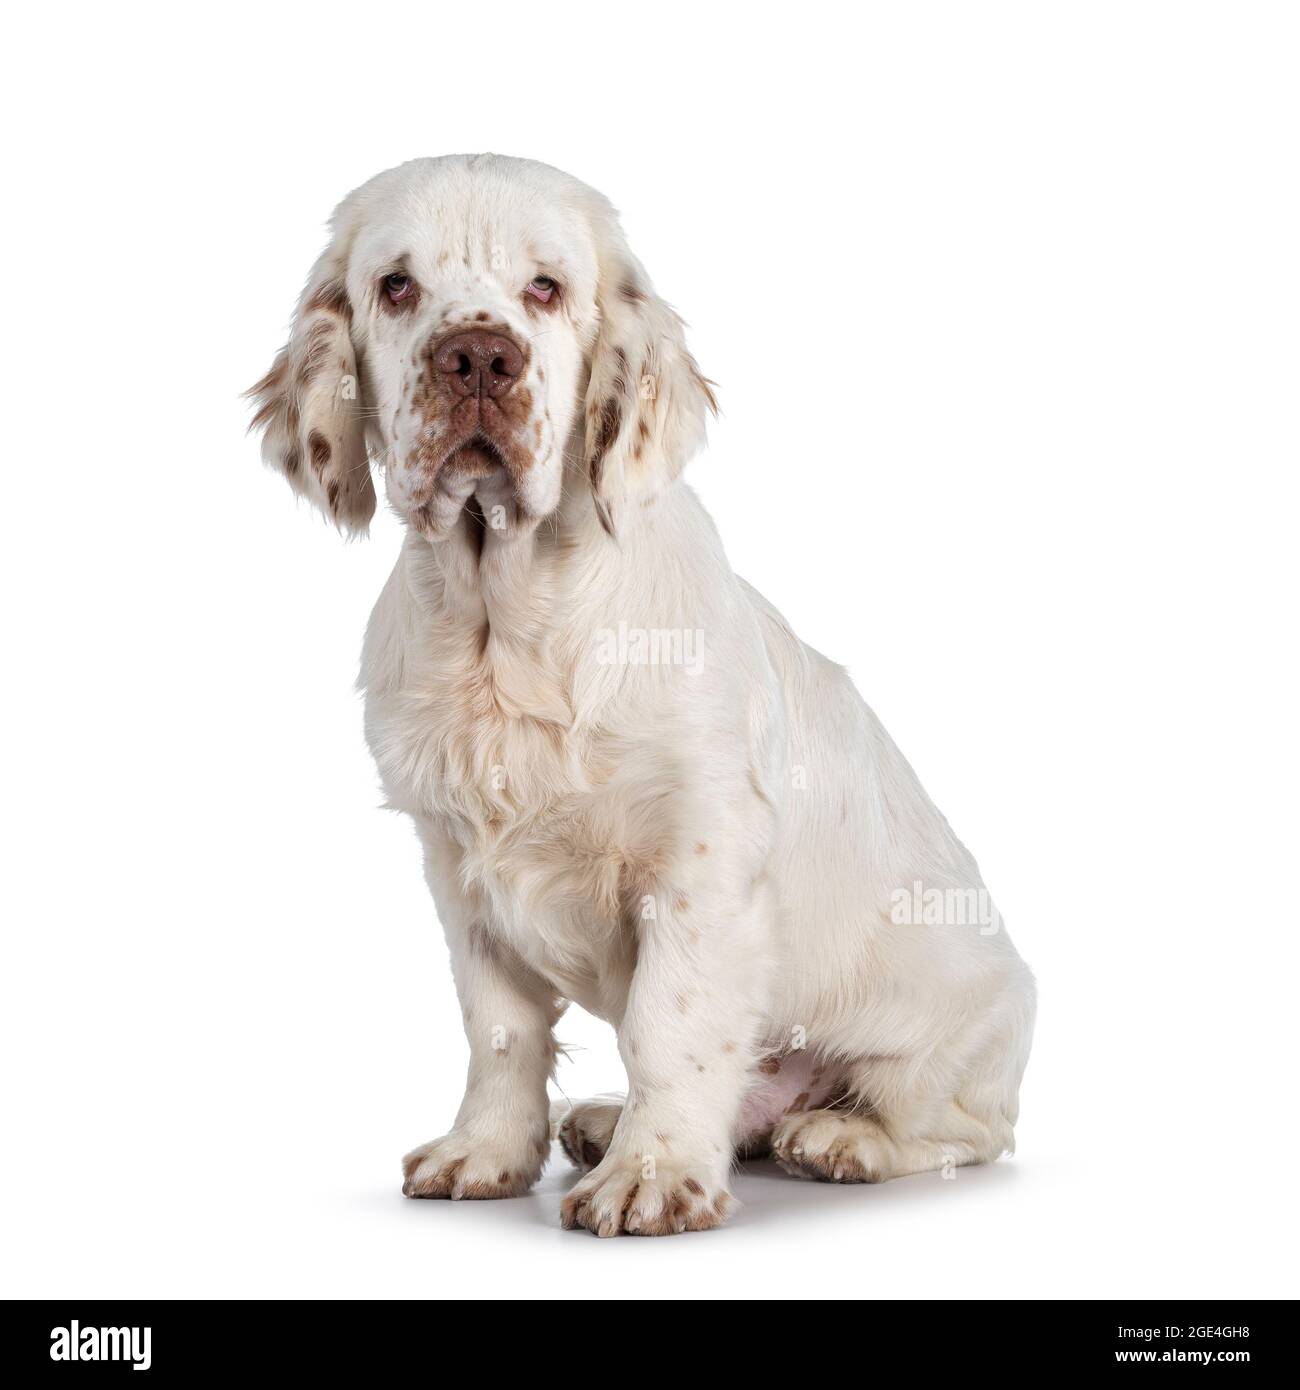 Cute Clumber Spaniel dog pup, sitting up side ways. Looking towards camera with the typical droopy eyes. Isolated on a white background. Stock Photo